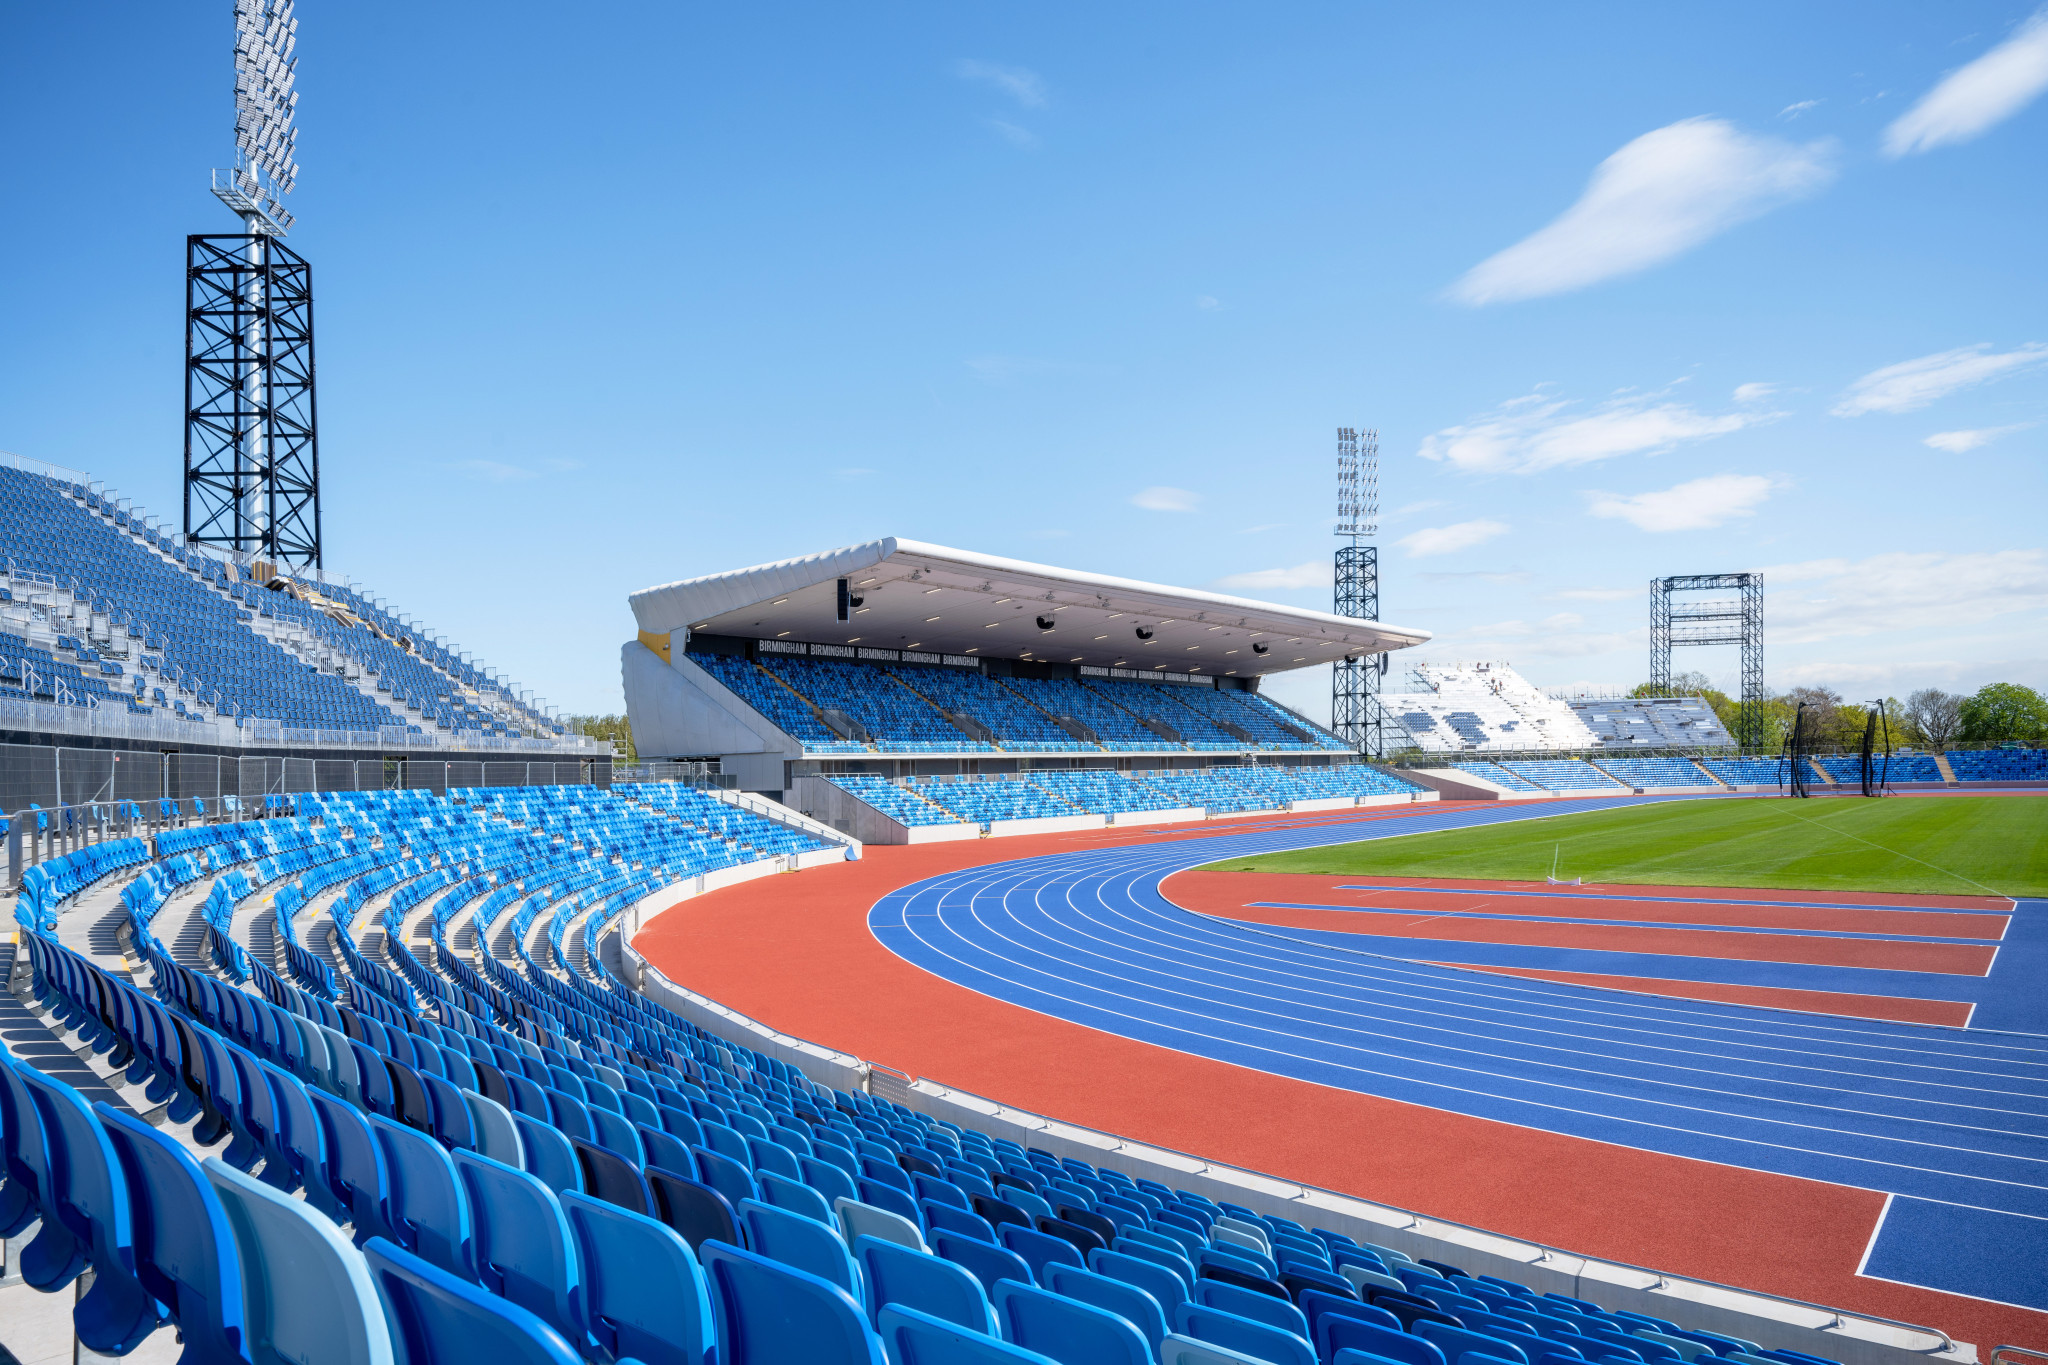 Aggreko is responsible for planning the temporary energy framework at all the Birmingham 2022 competition venues, including the Alexander Stadium ©Aggreko